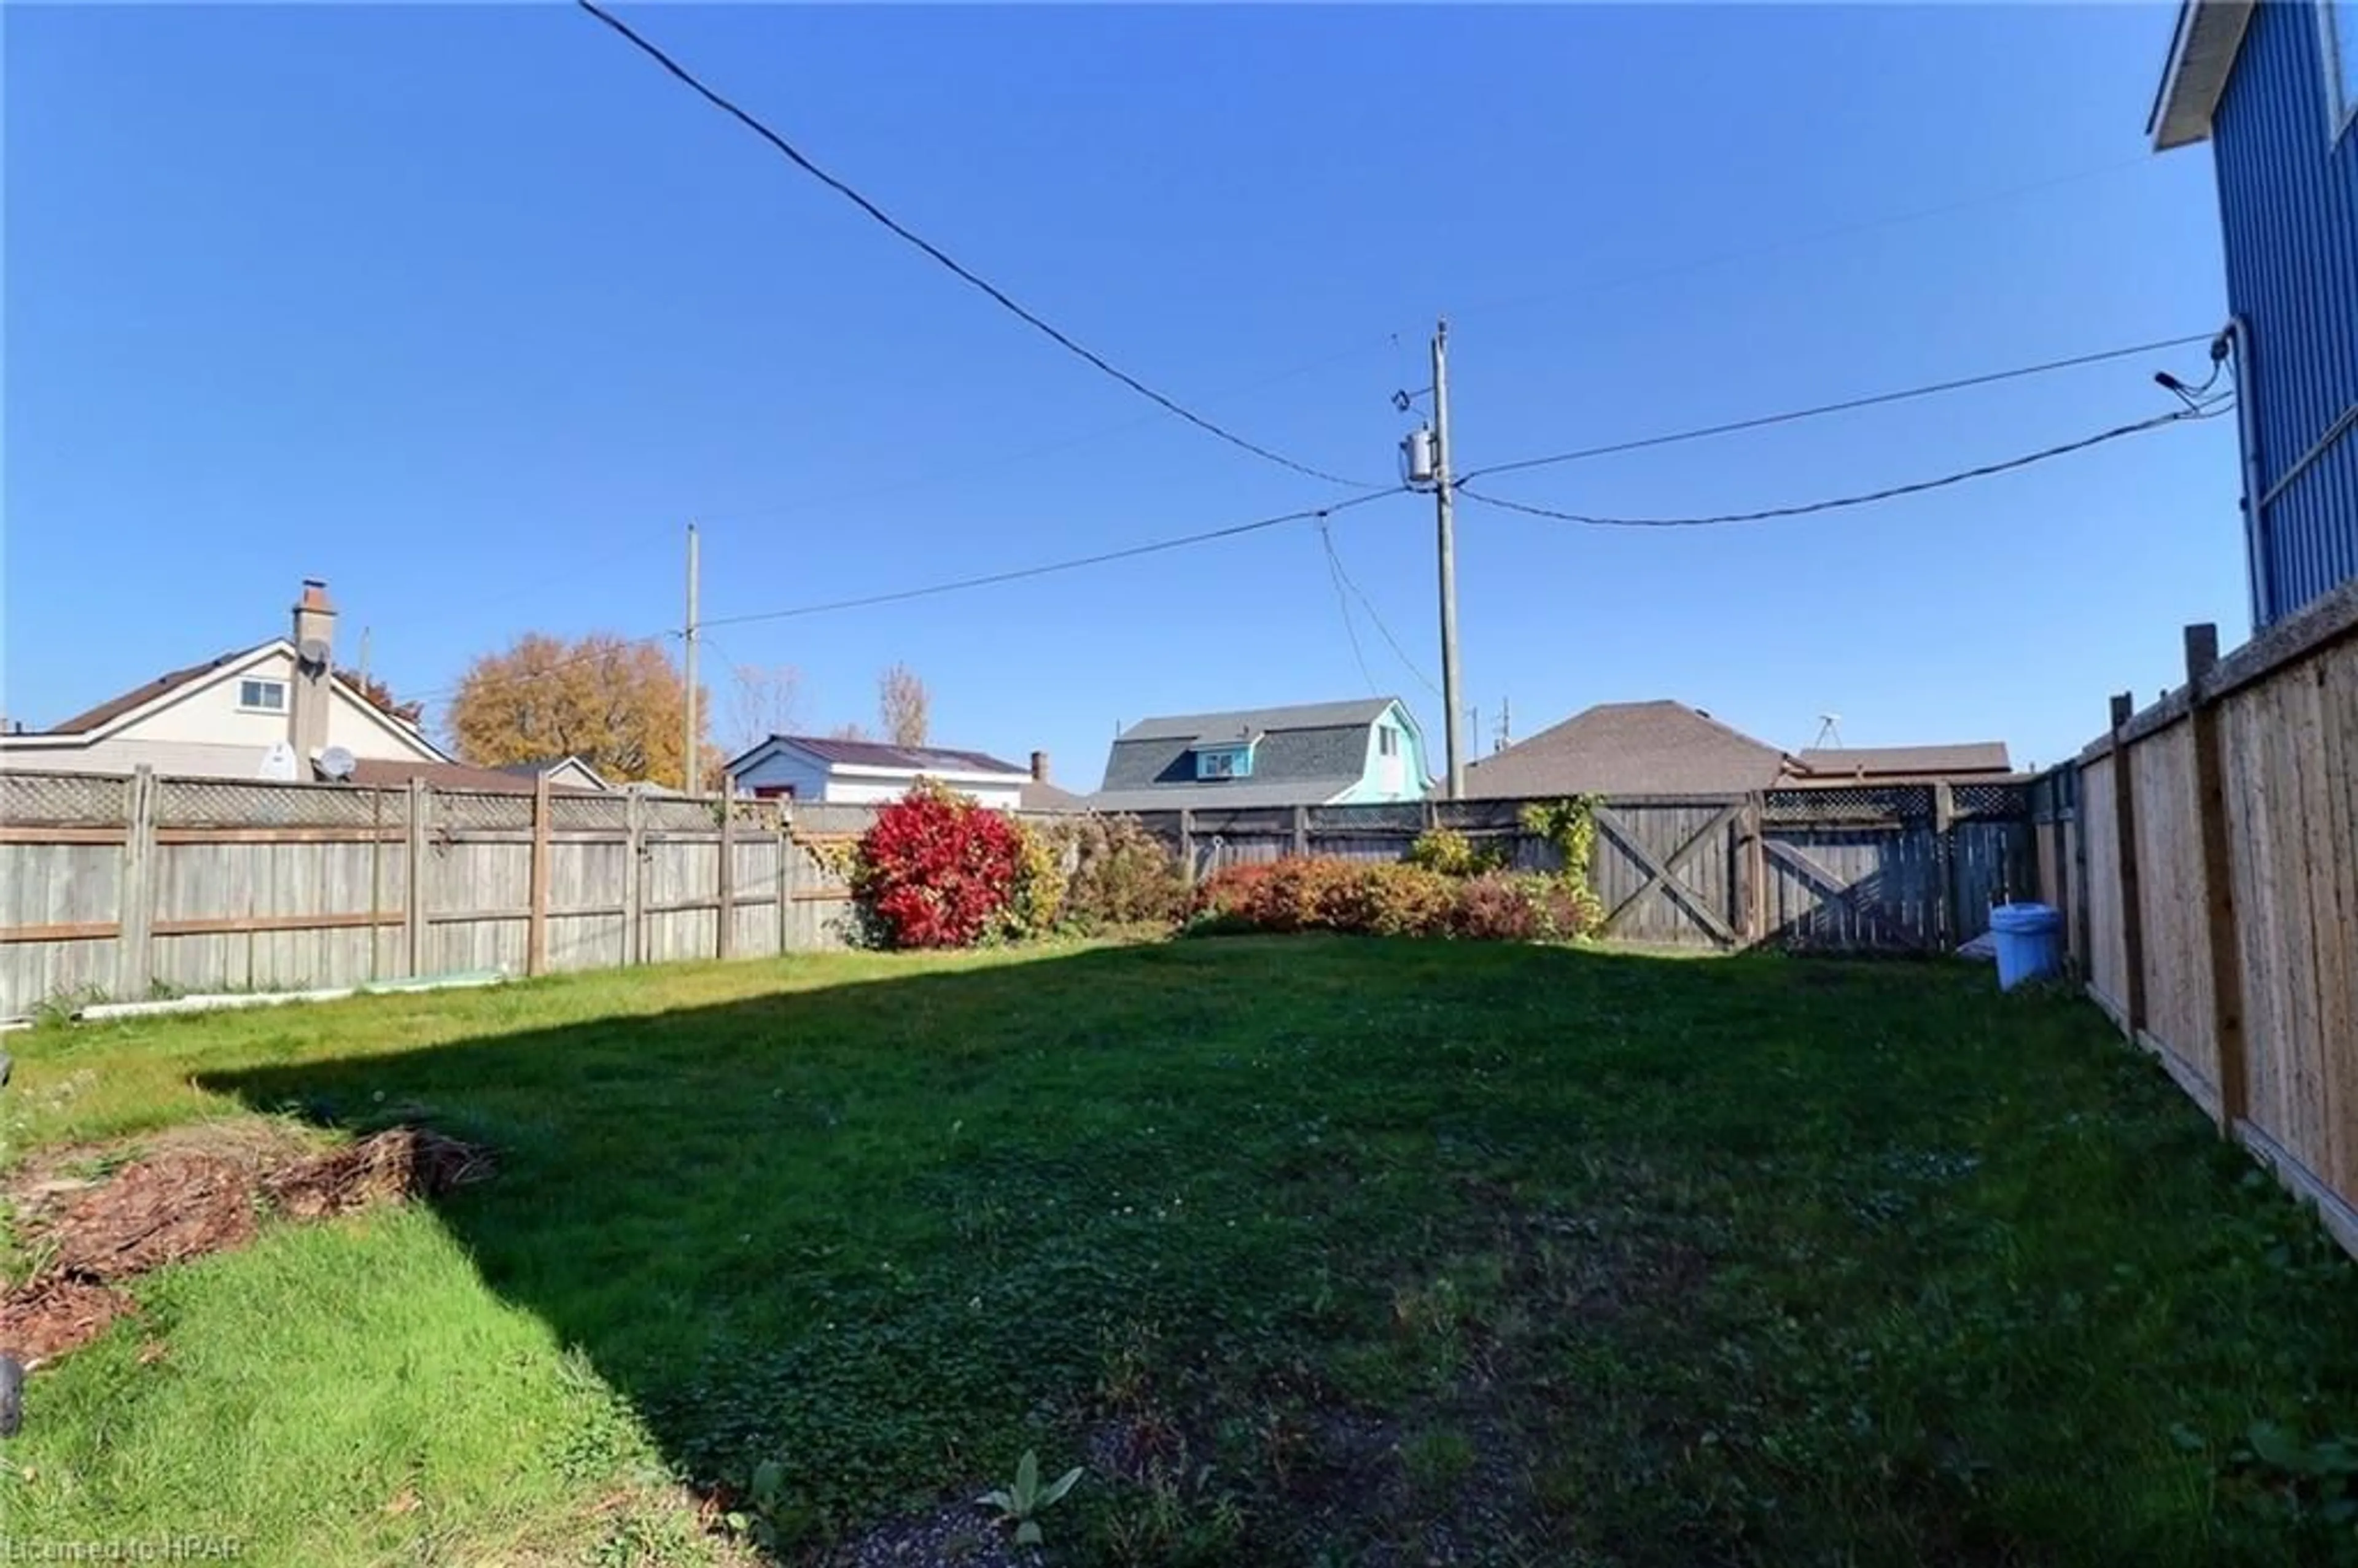 Fenced yard for LOT 80 Maud St, Port Stanley Ontario N5L 1E1